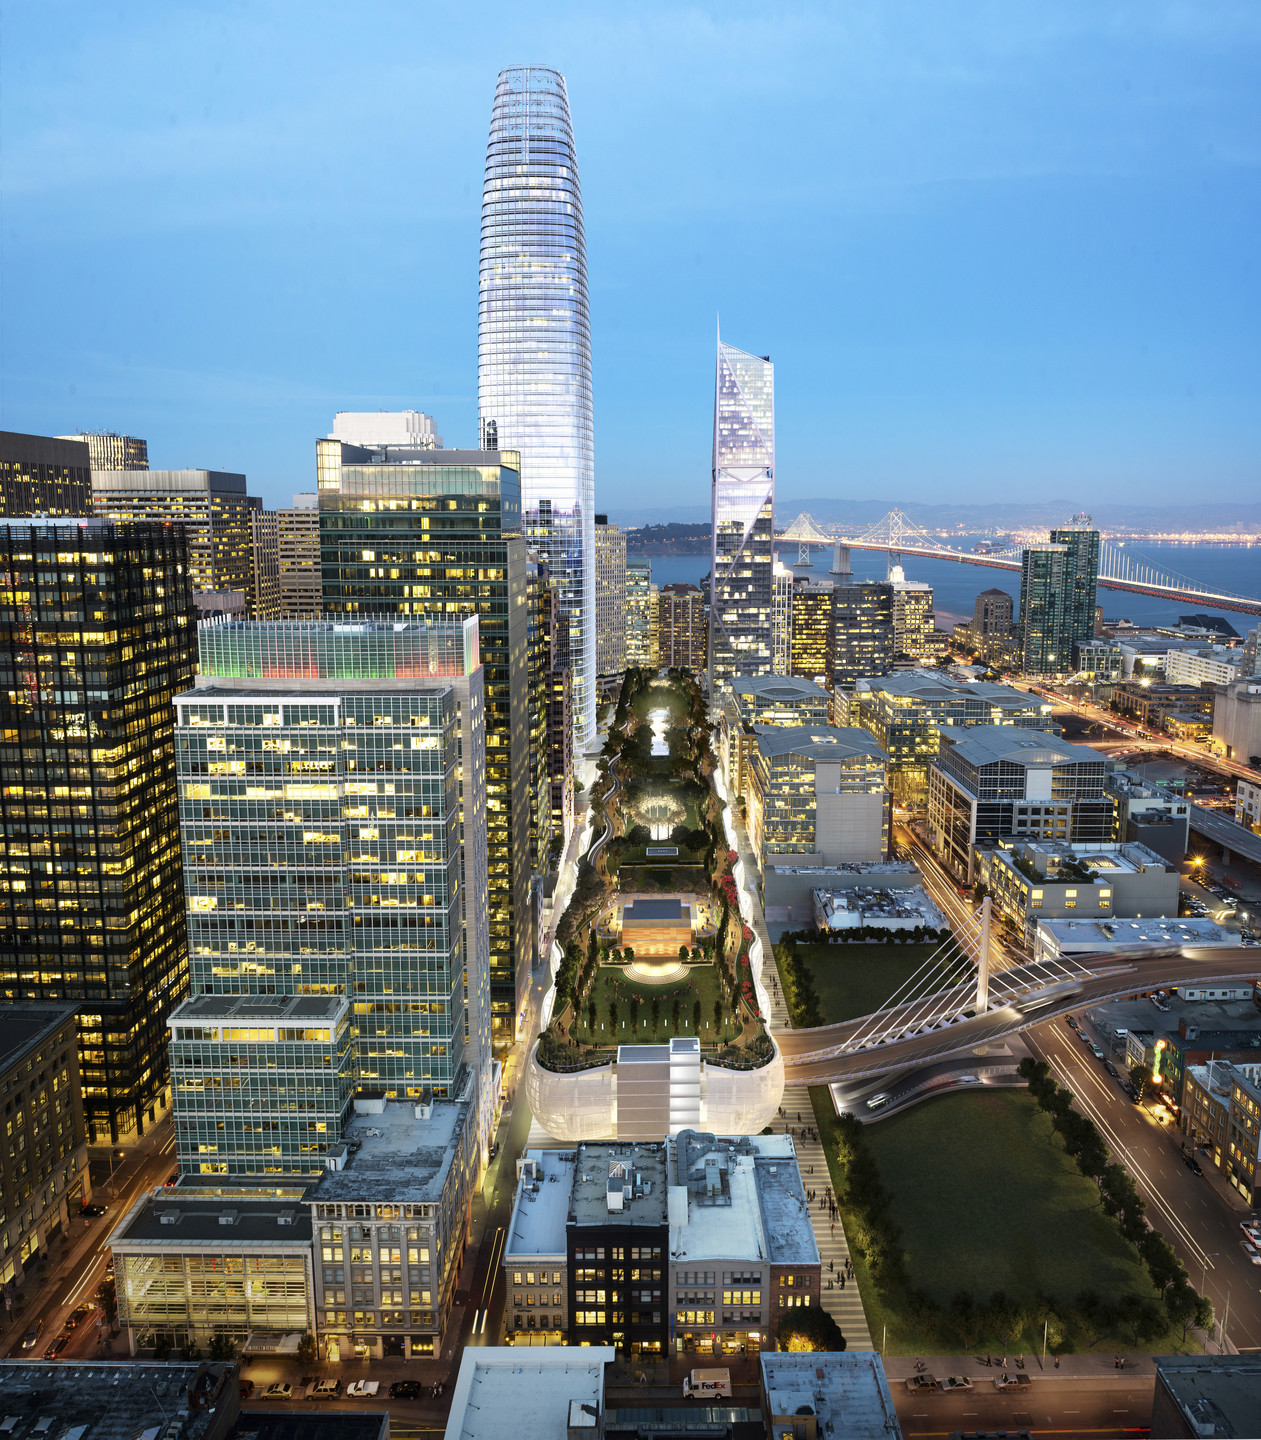 Project Architect: Pelli Clarke Pelli.  Renderings courtesy of the Transbay Joint Powers Authority (TJPA)